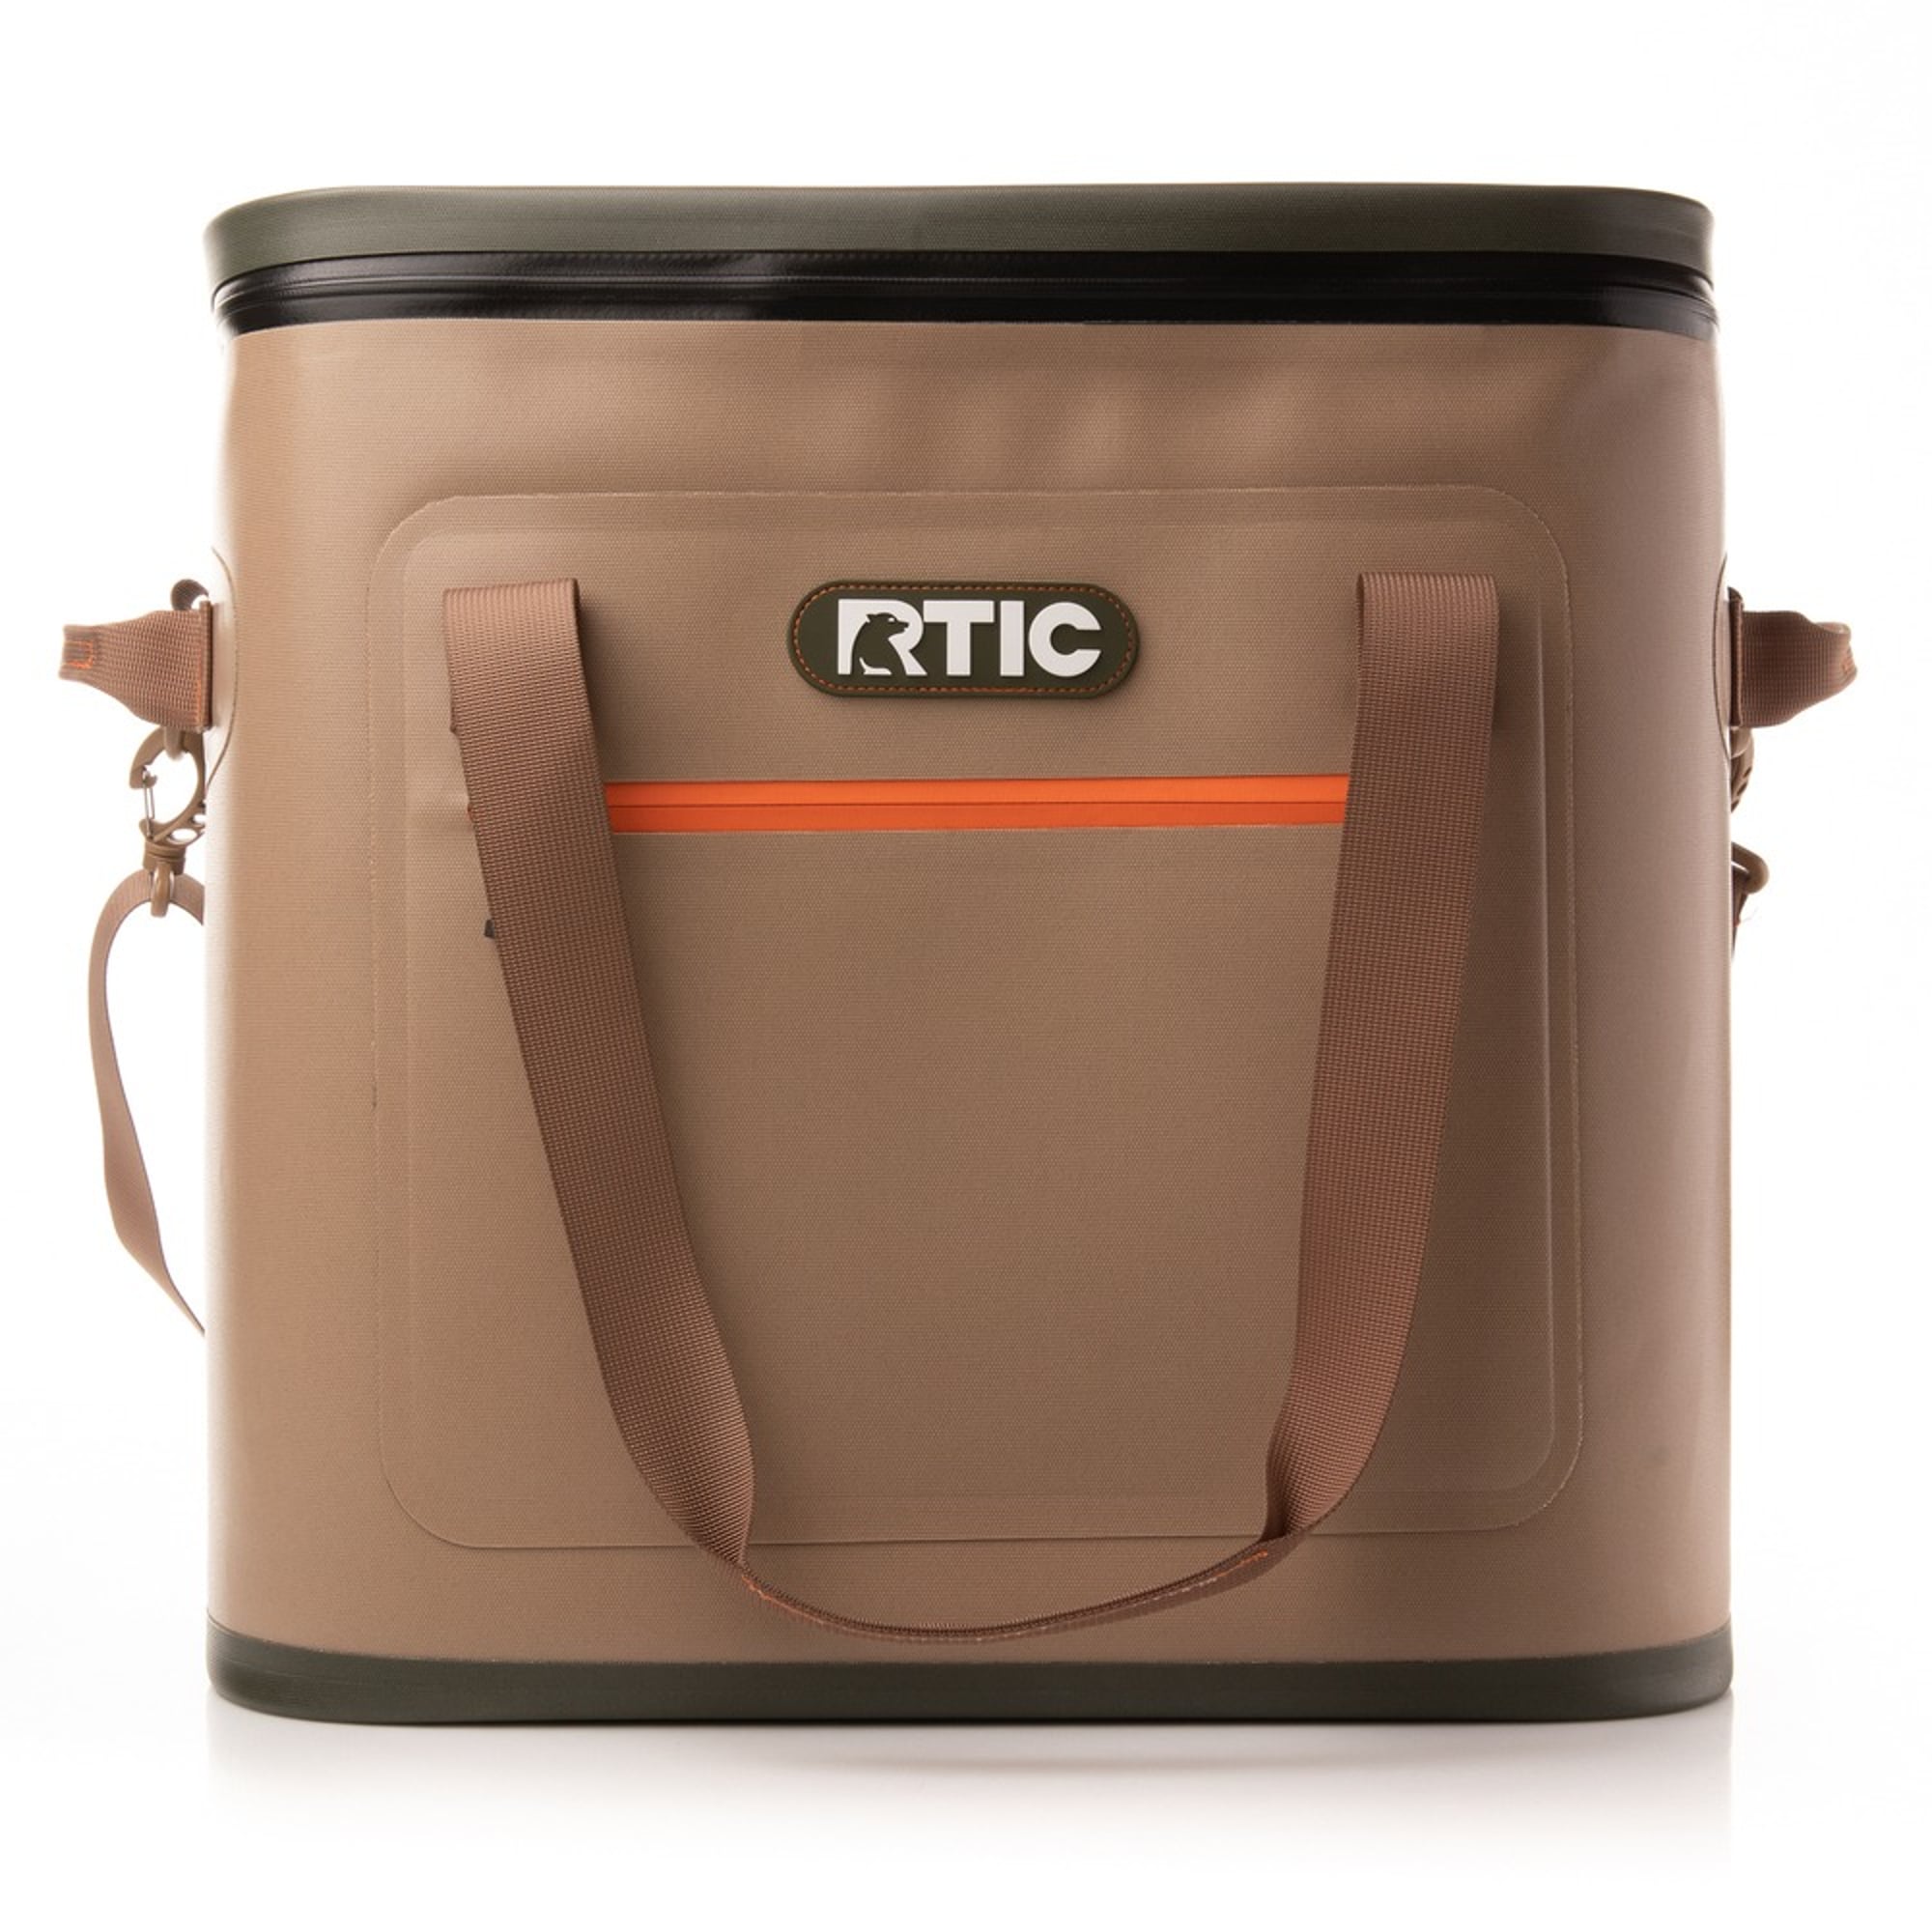 RTIC Handles 2021 Version for 20, 30 and 40 oz 2021 RTIC Tumblers